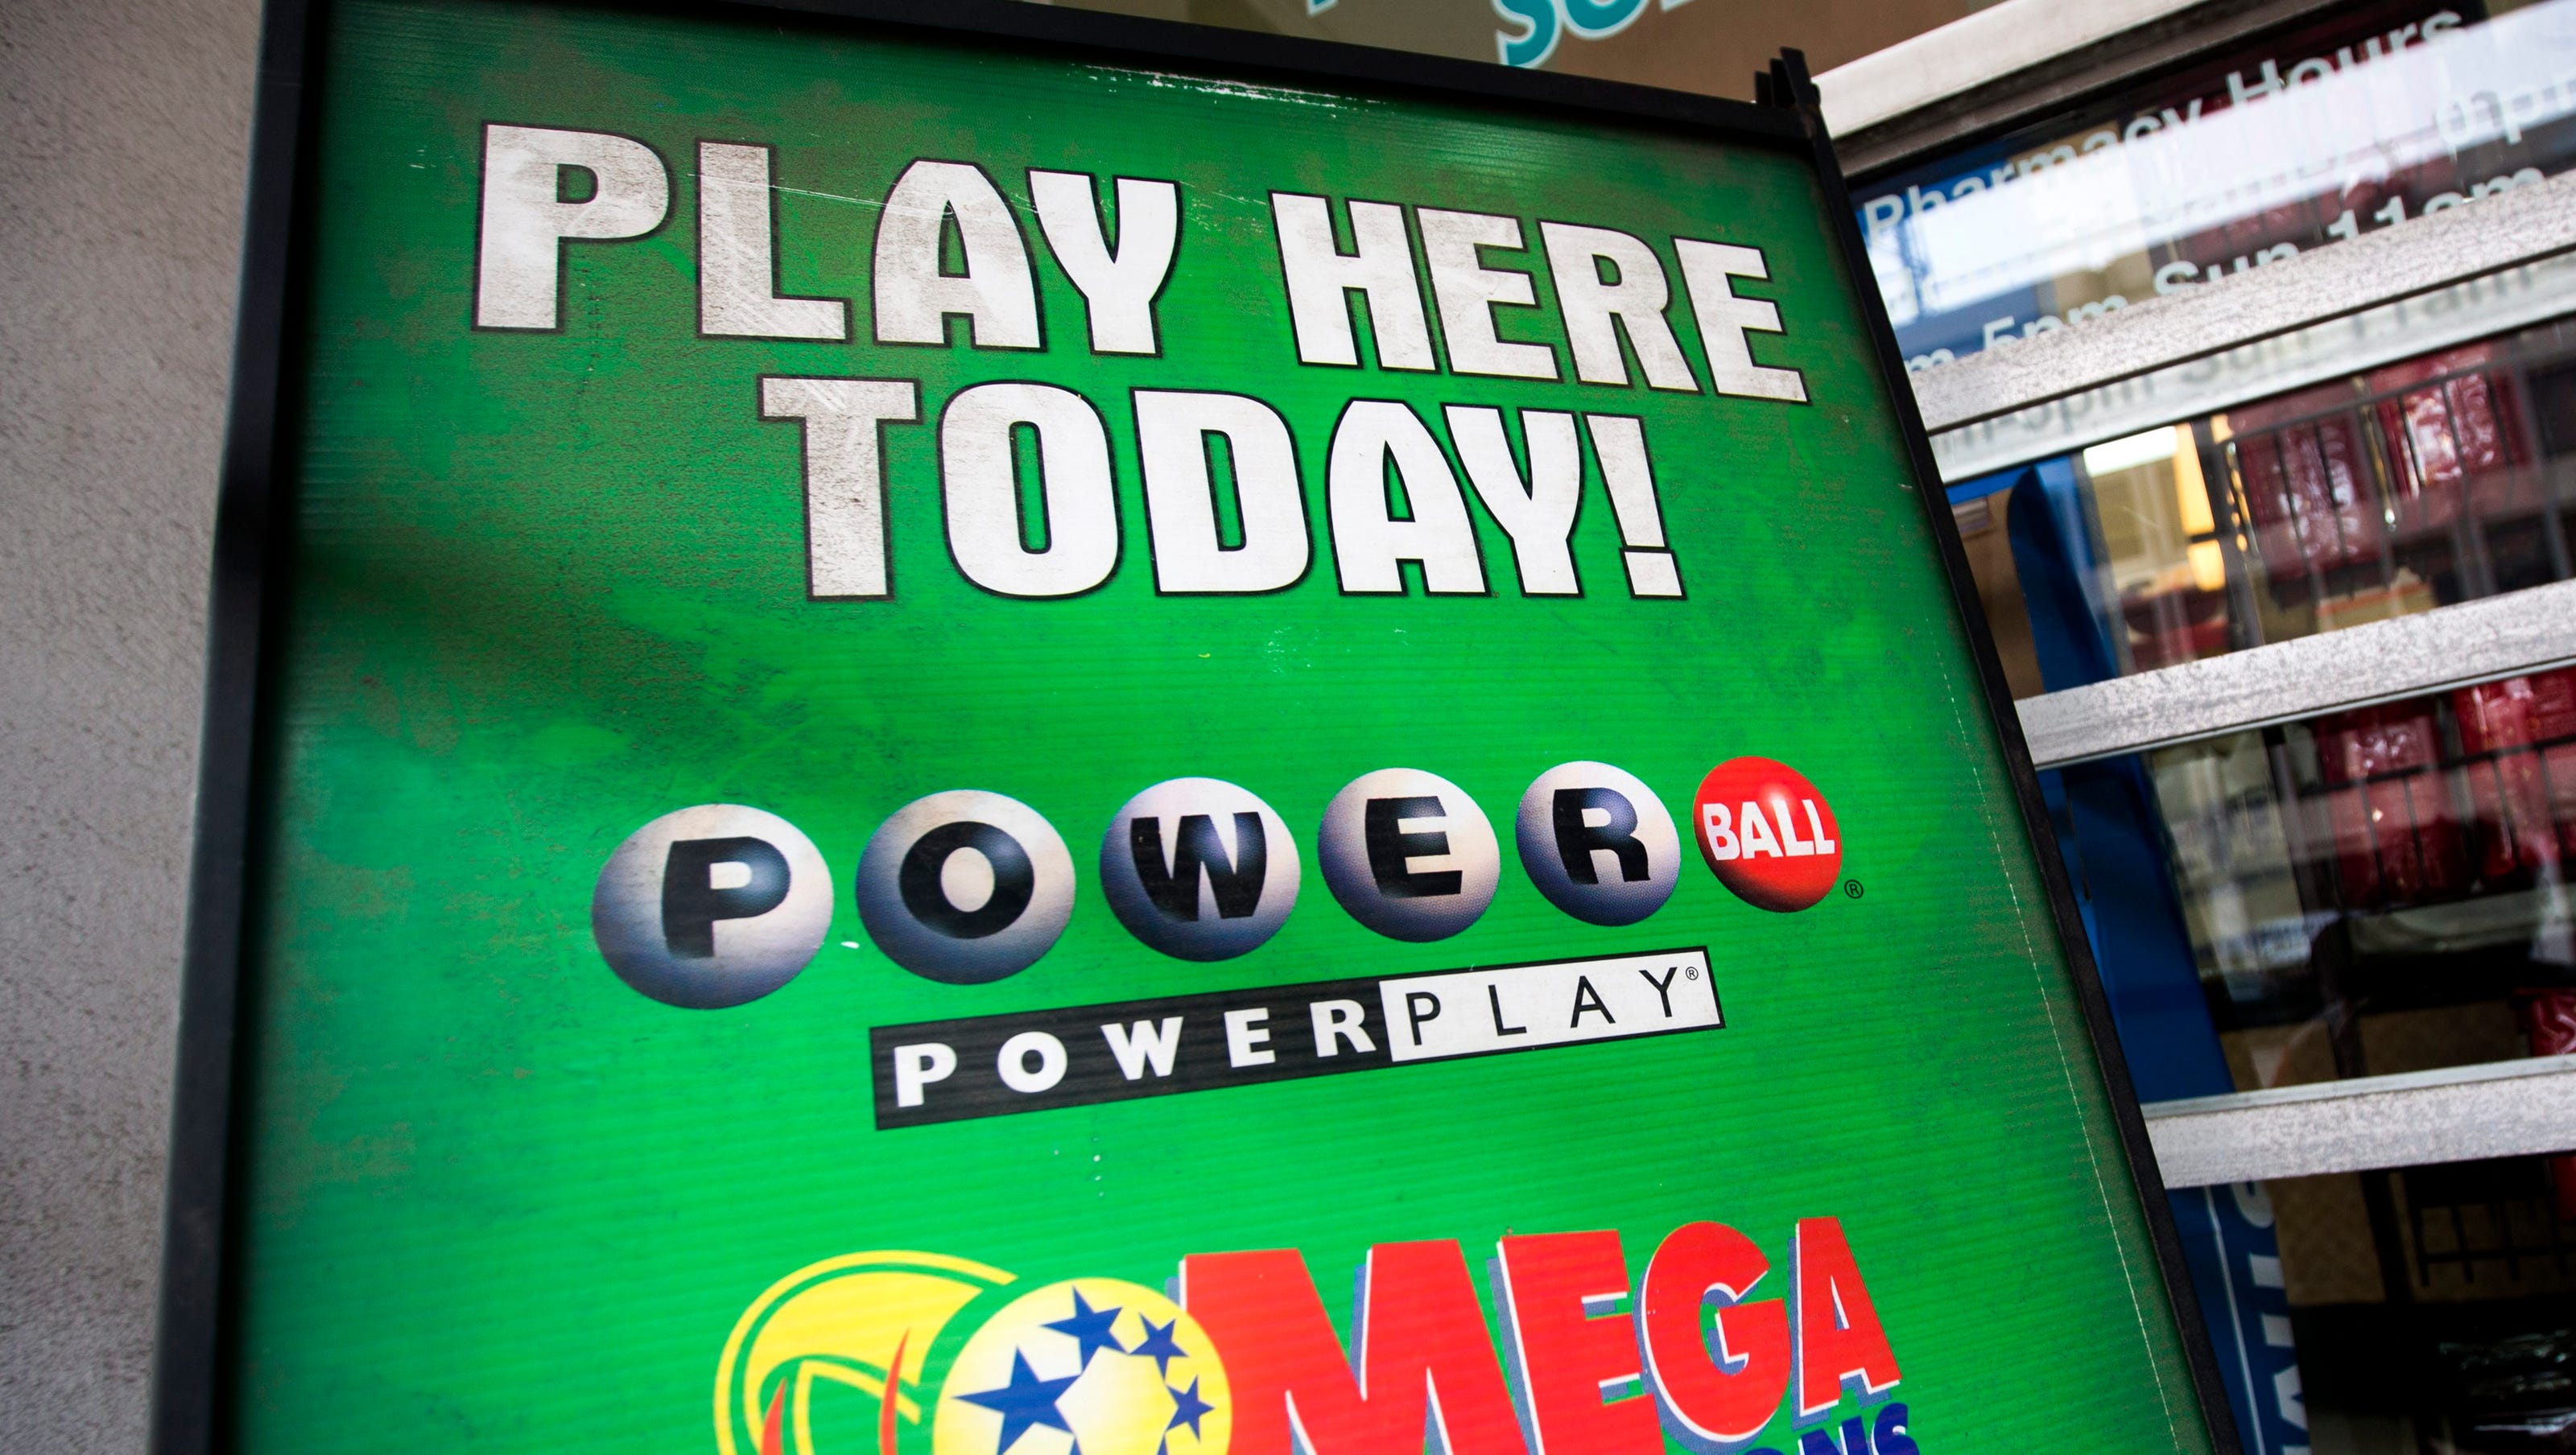 Powerball's Saturday drawing is for a 254 million jackpot